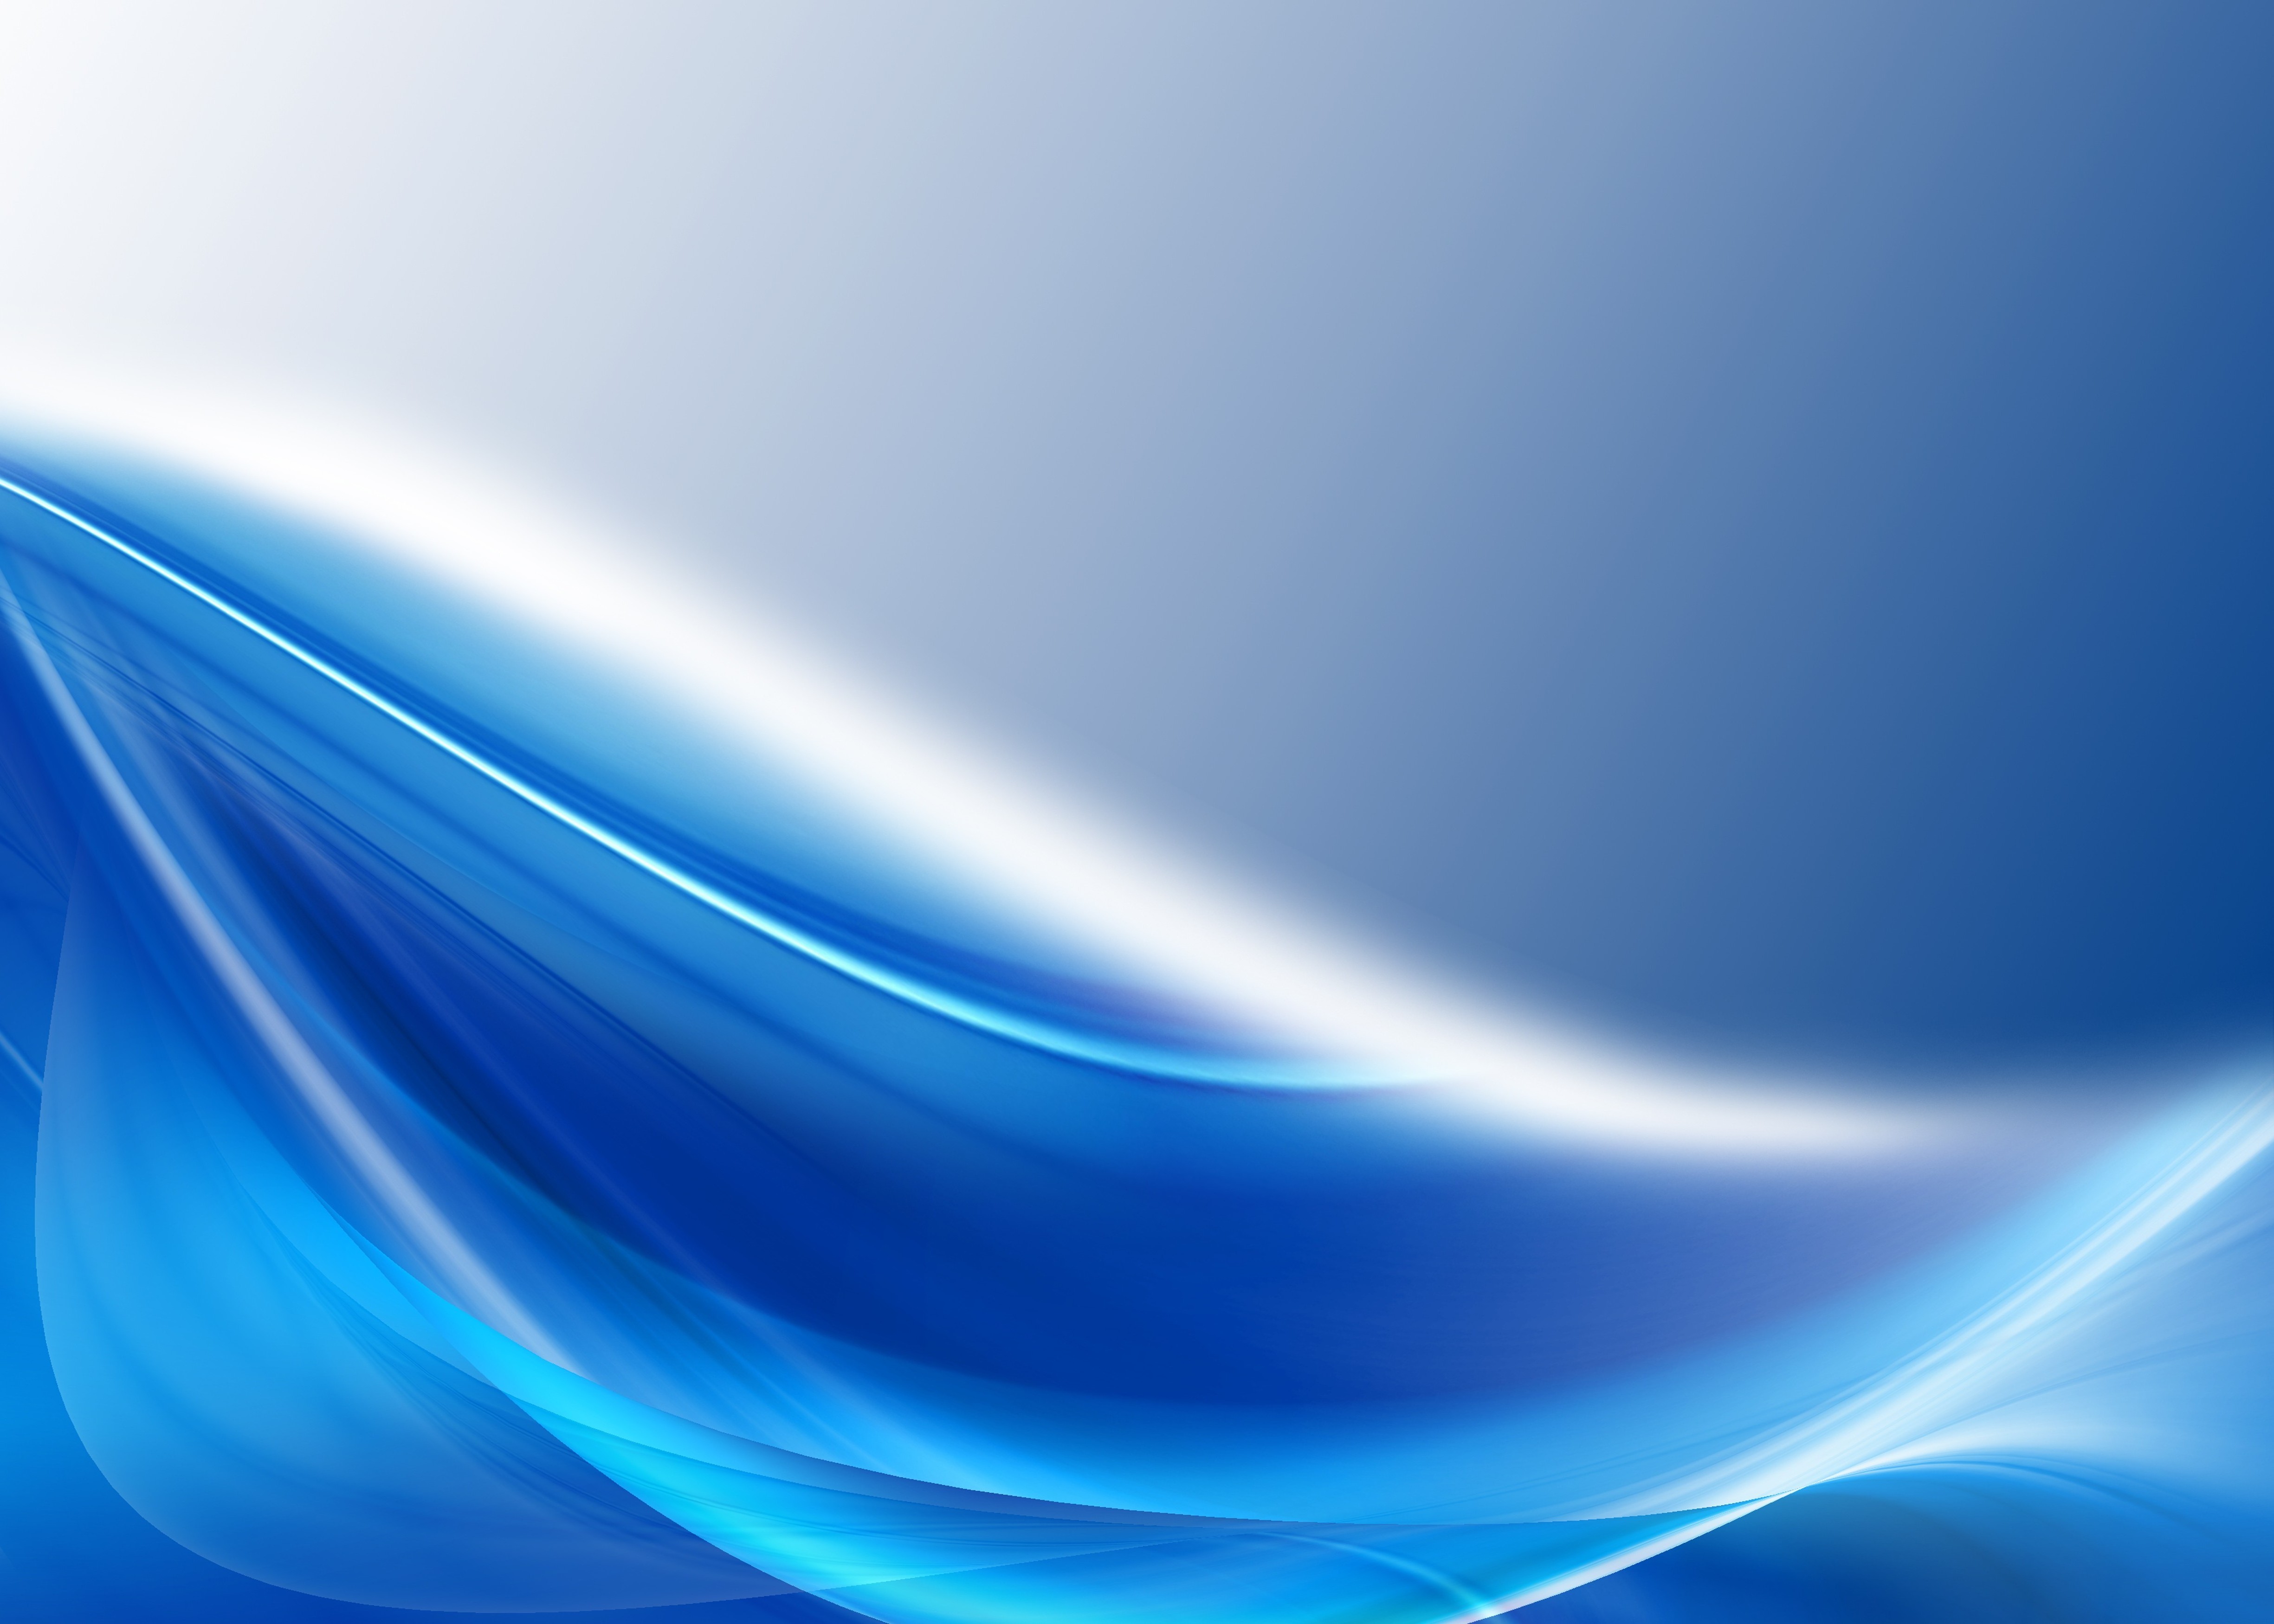 Wallpapers For Blue Abstract Background Images 4900x3500